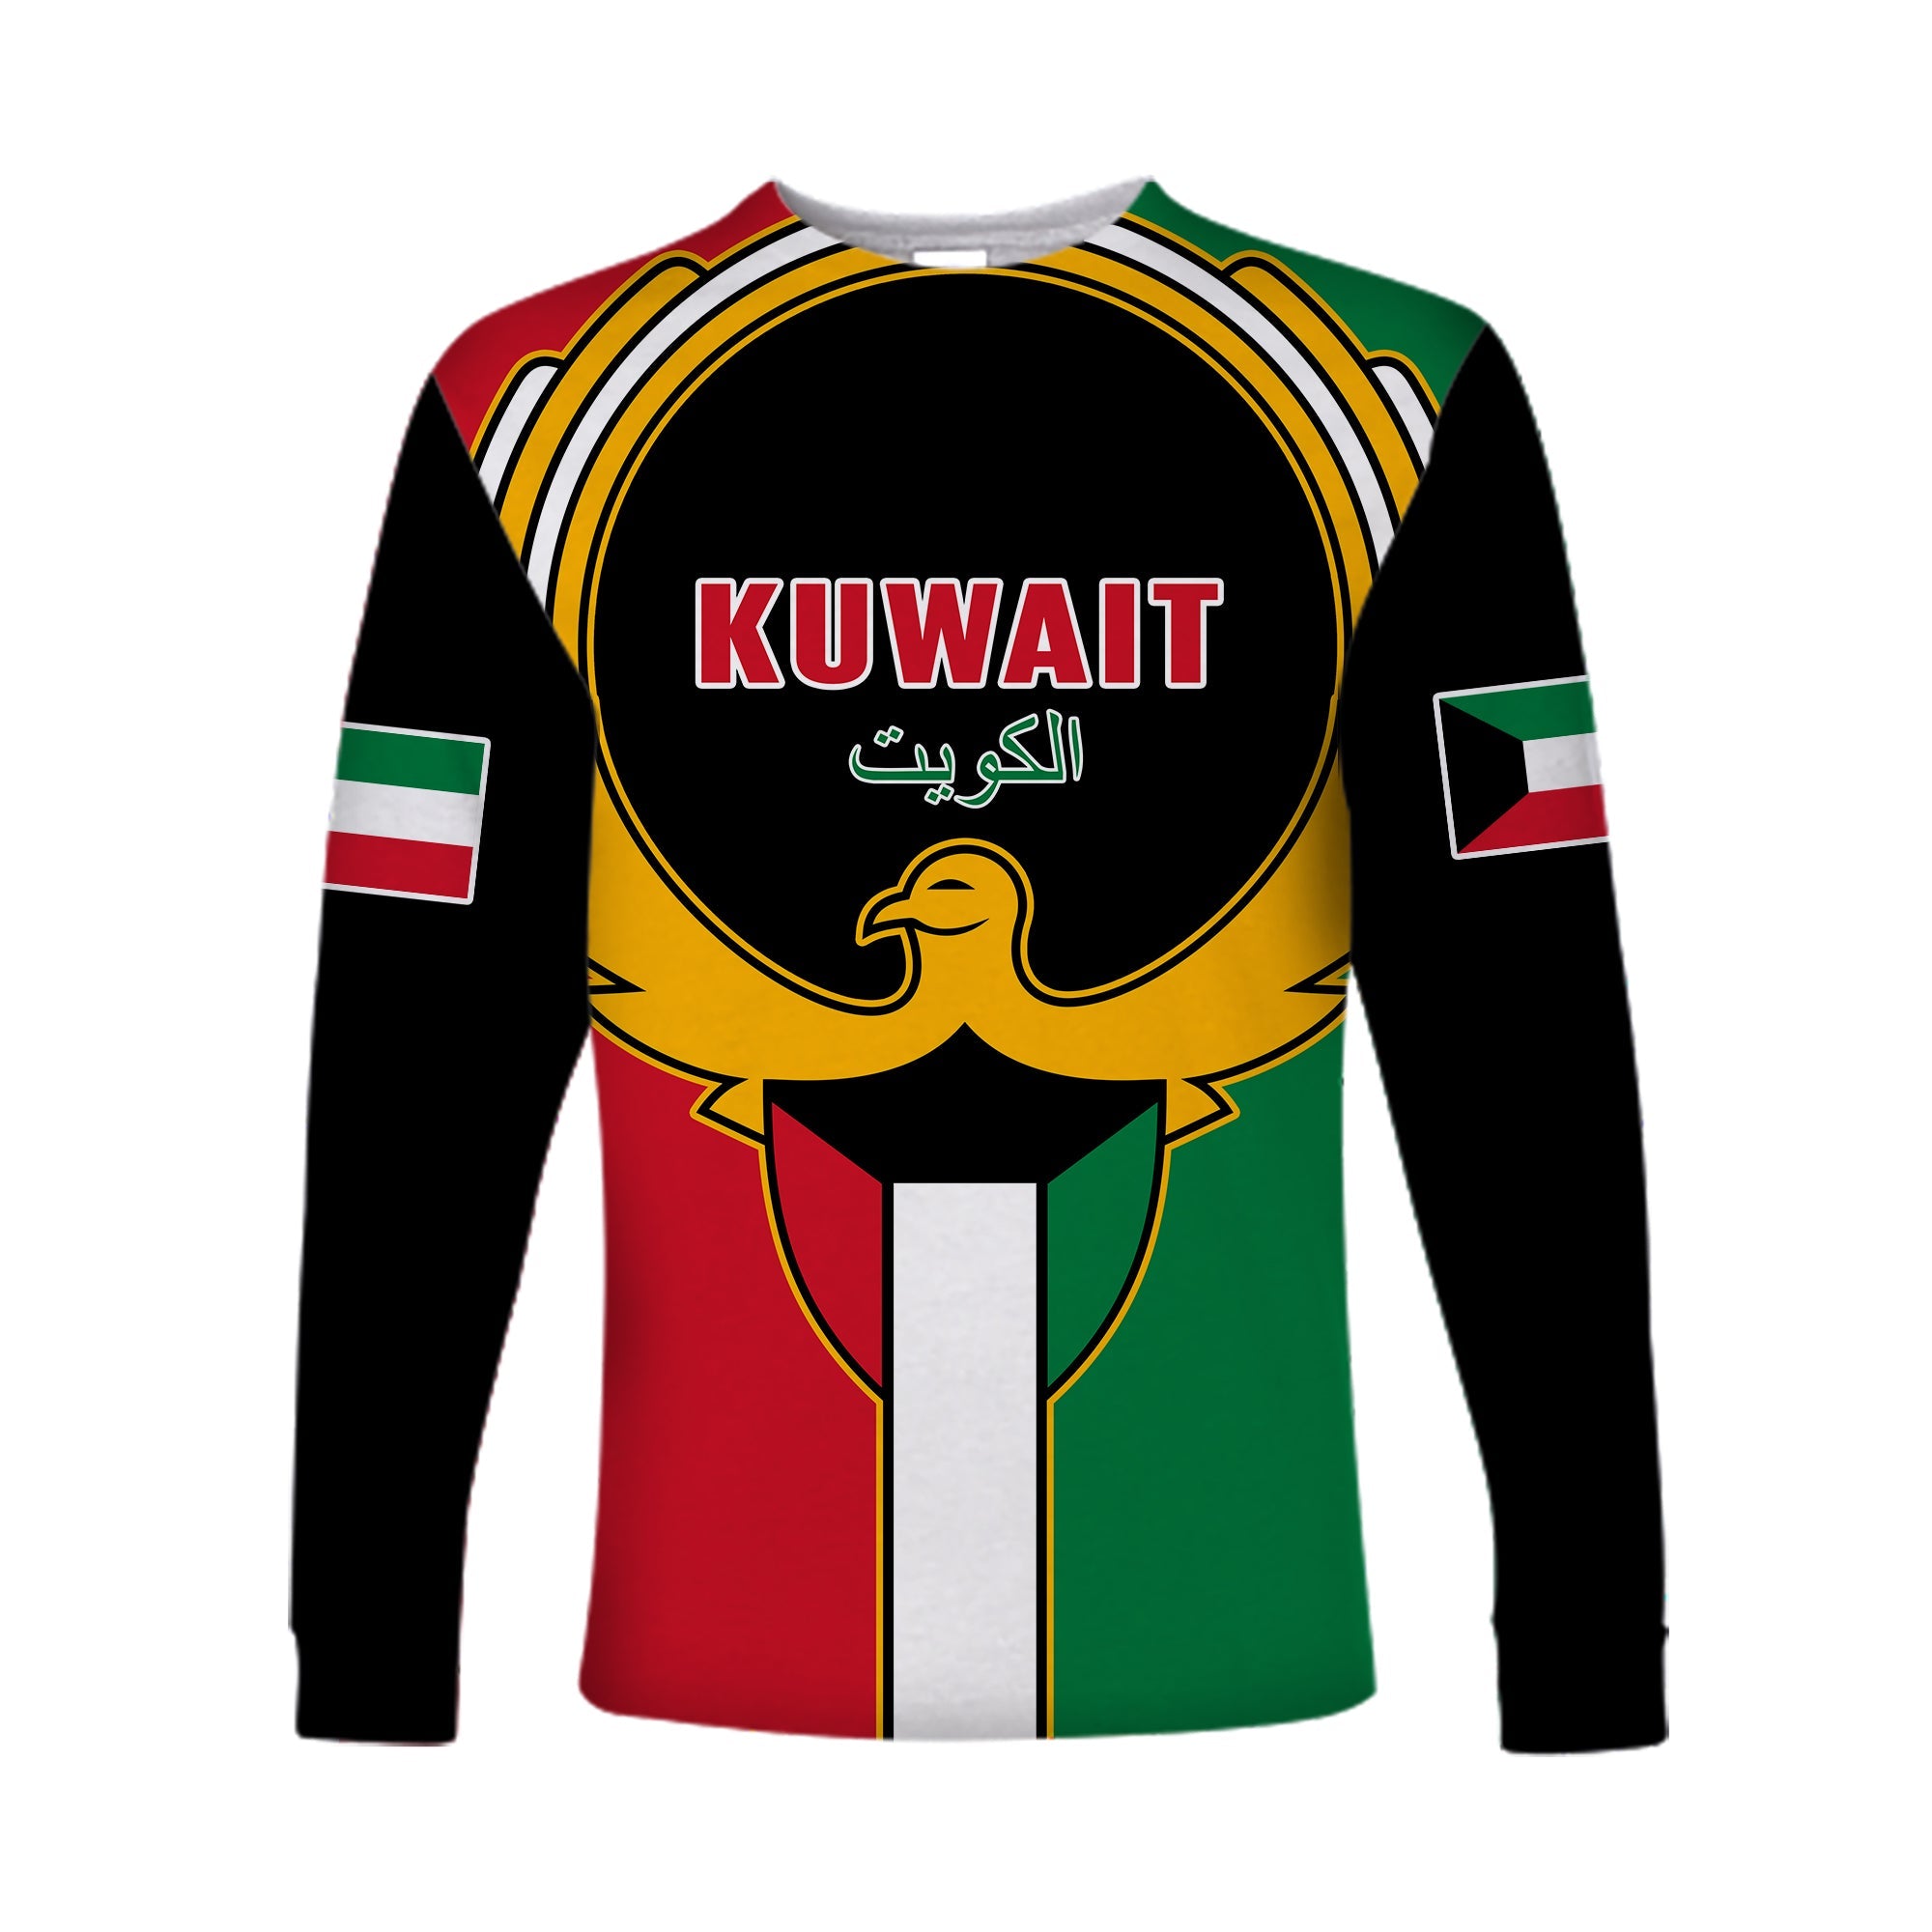 kuwait-long-sleeve-shirt-happy-independence-day-with-coat-of-arms